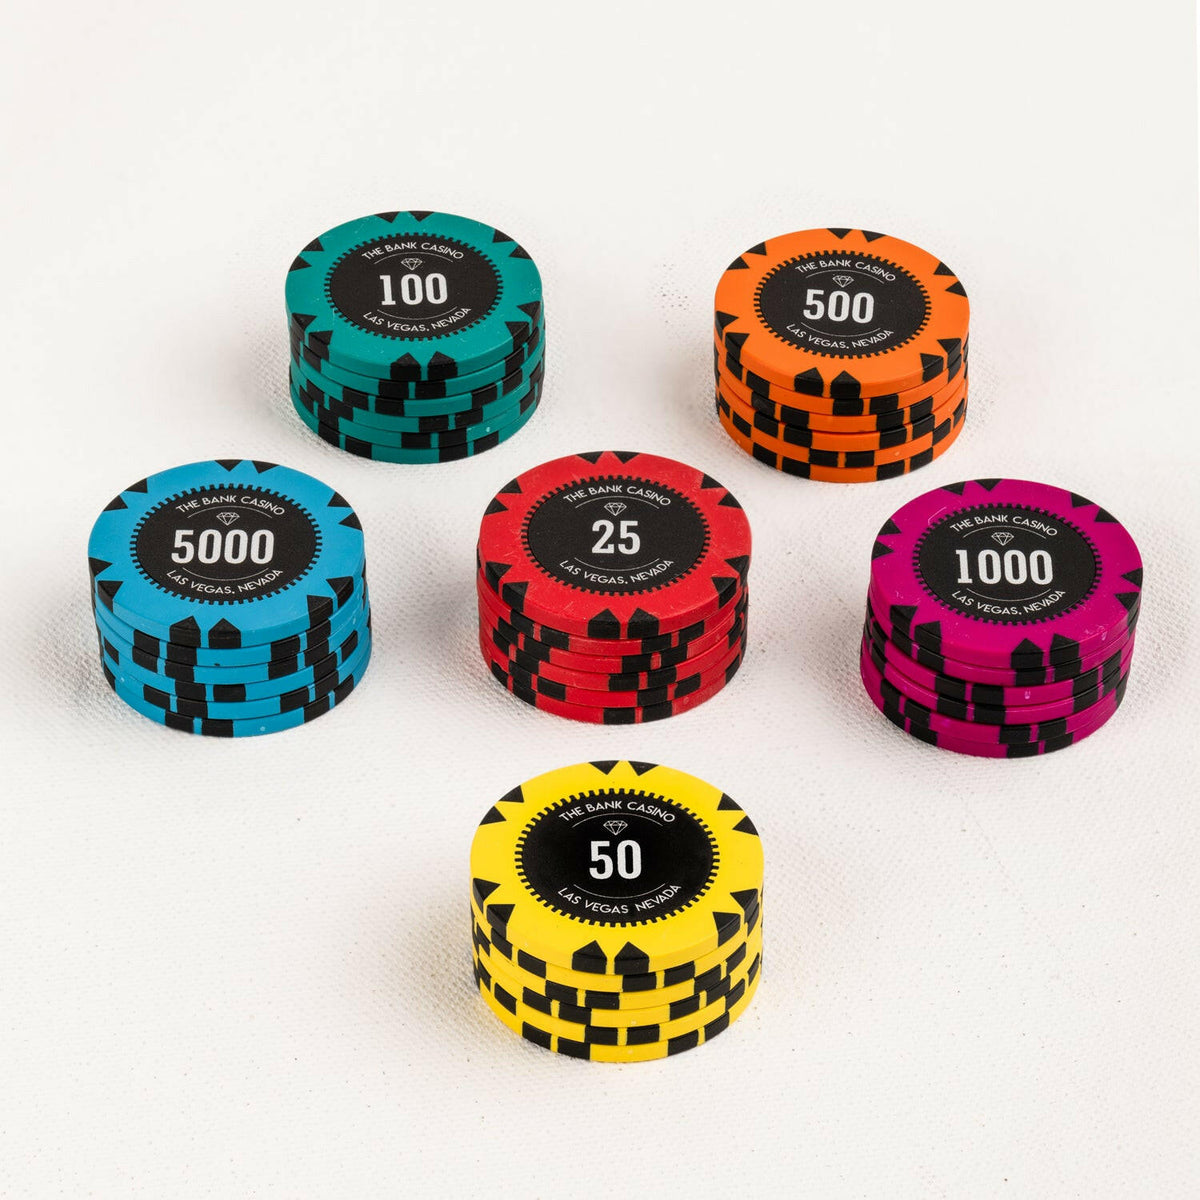 effektivt patologisk vitamin Shop Bank Casino 300 And 500 Pieces Clay Poker Chips Set At Best Price